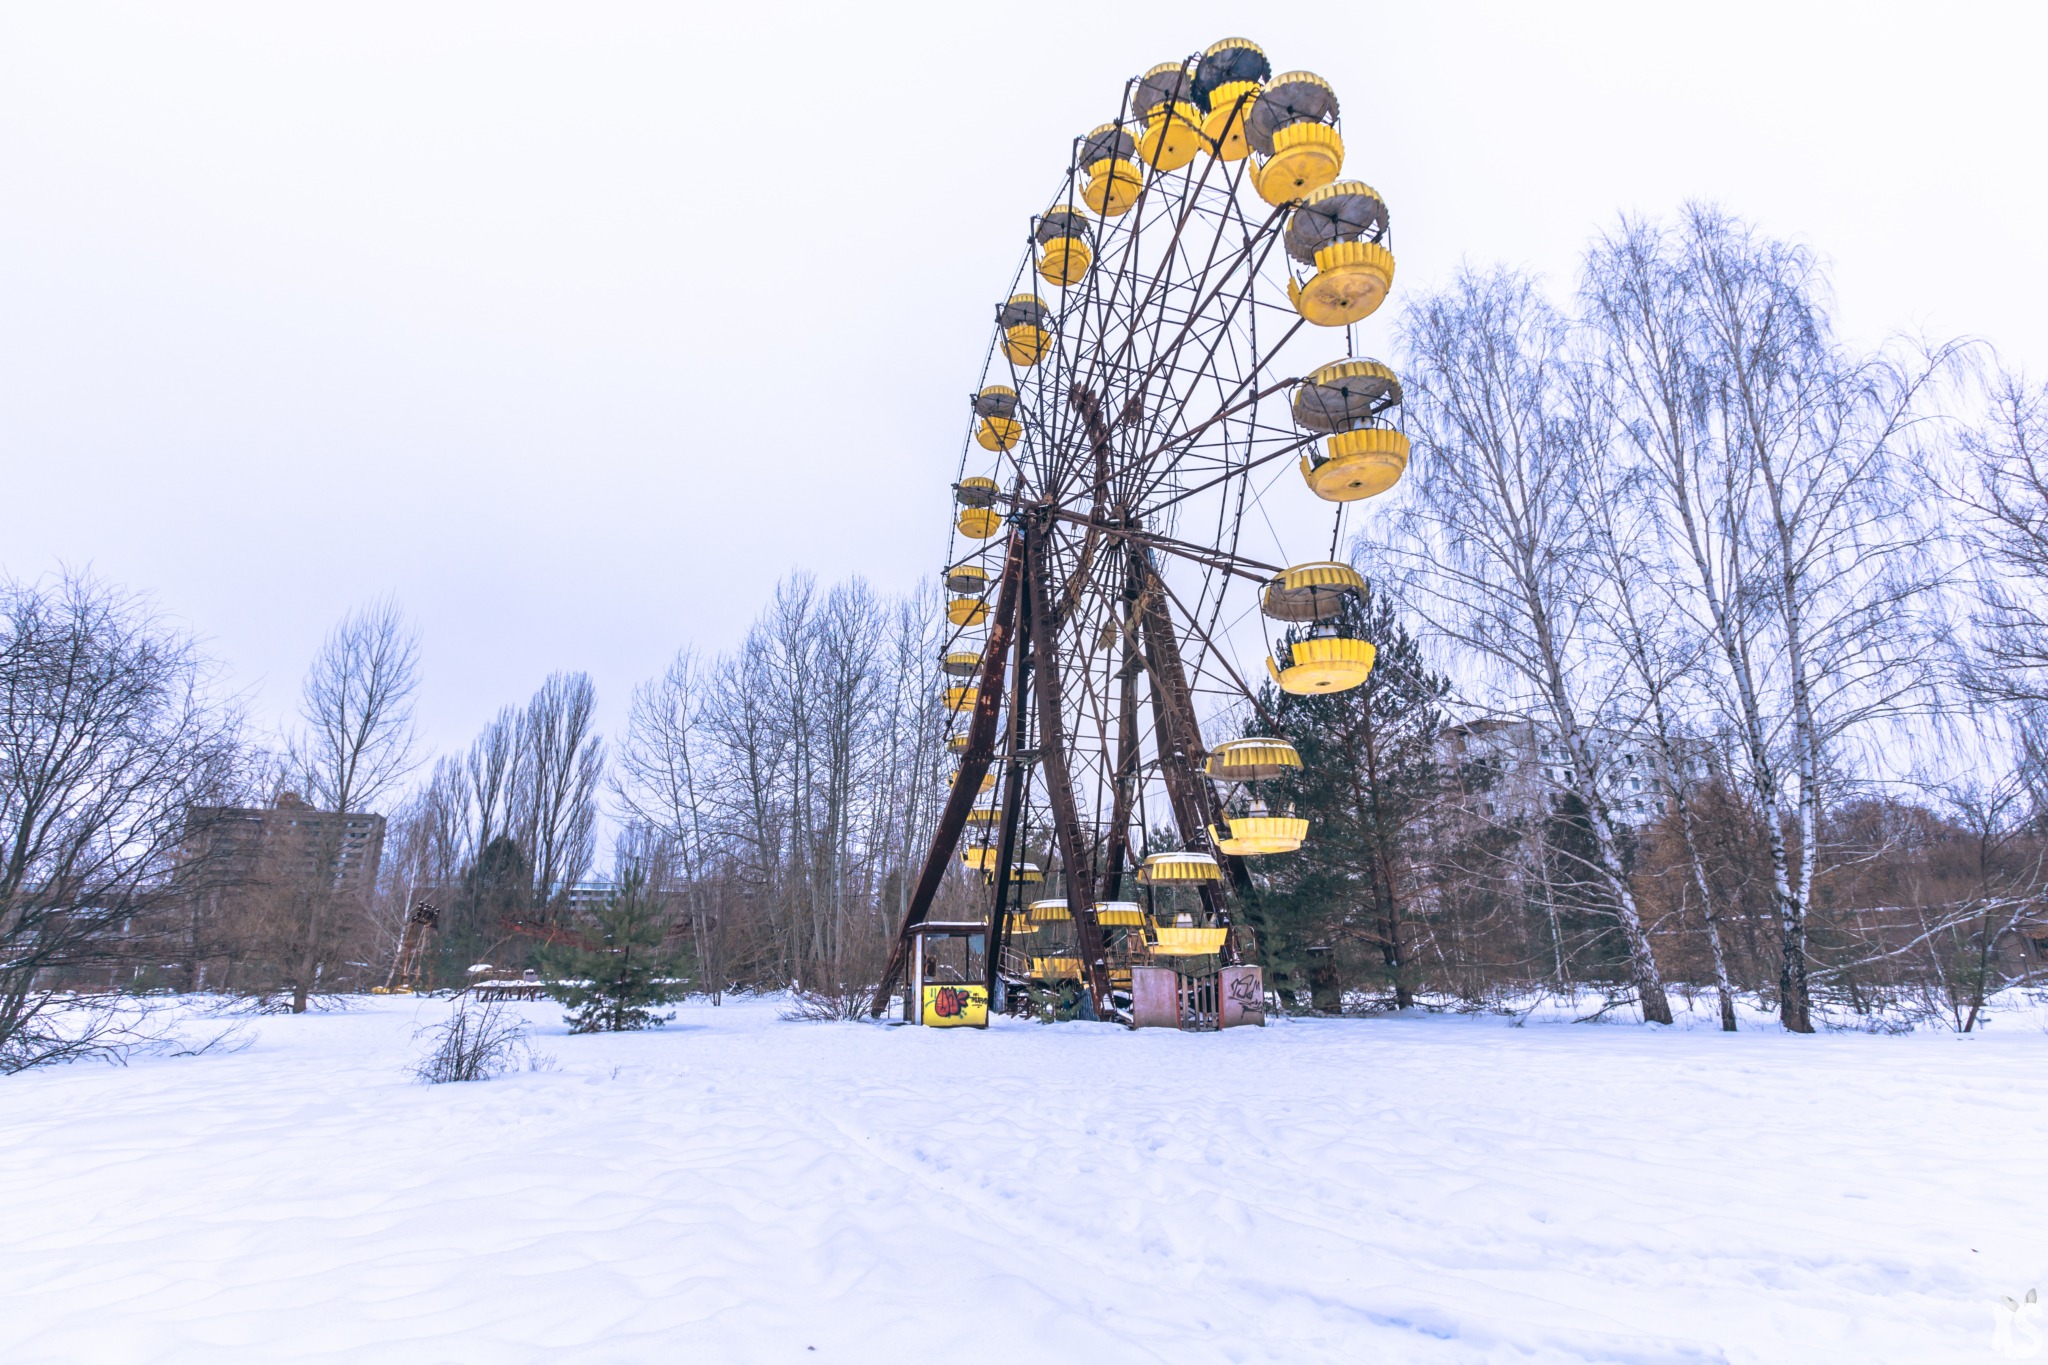 chernobyl guided tour price